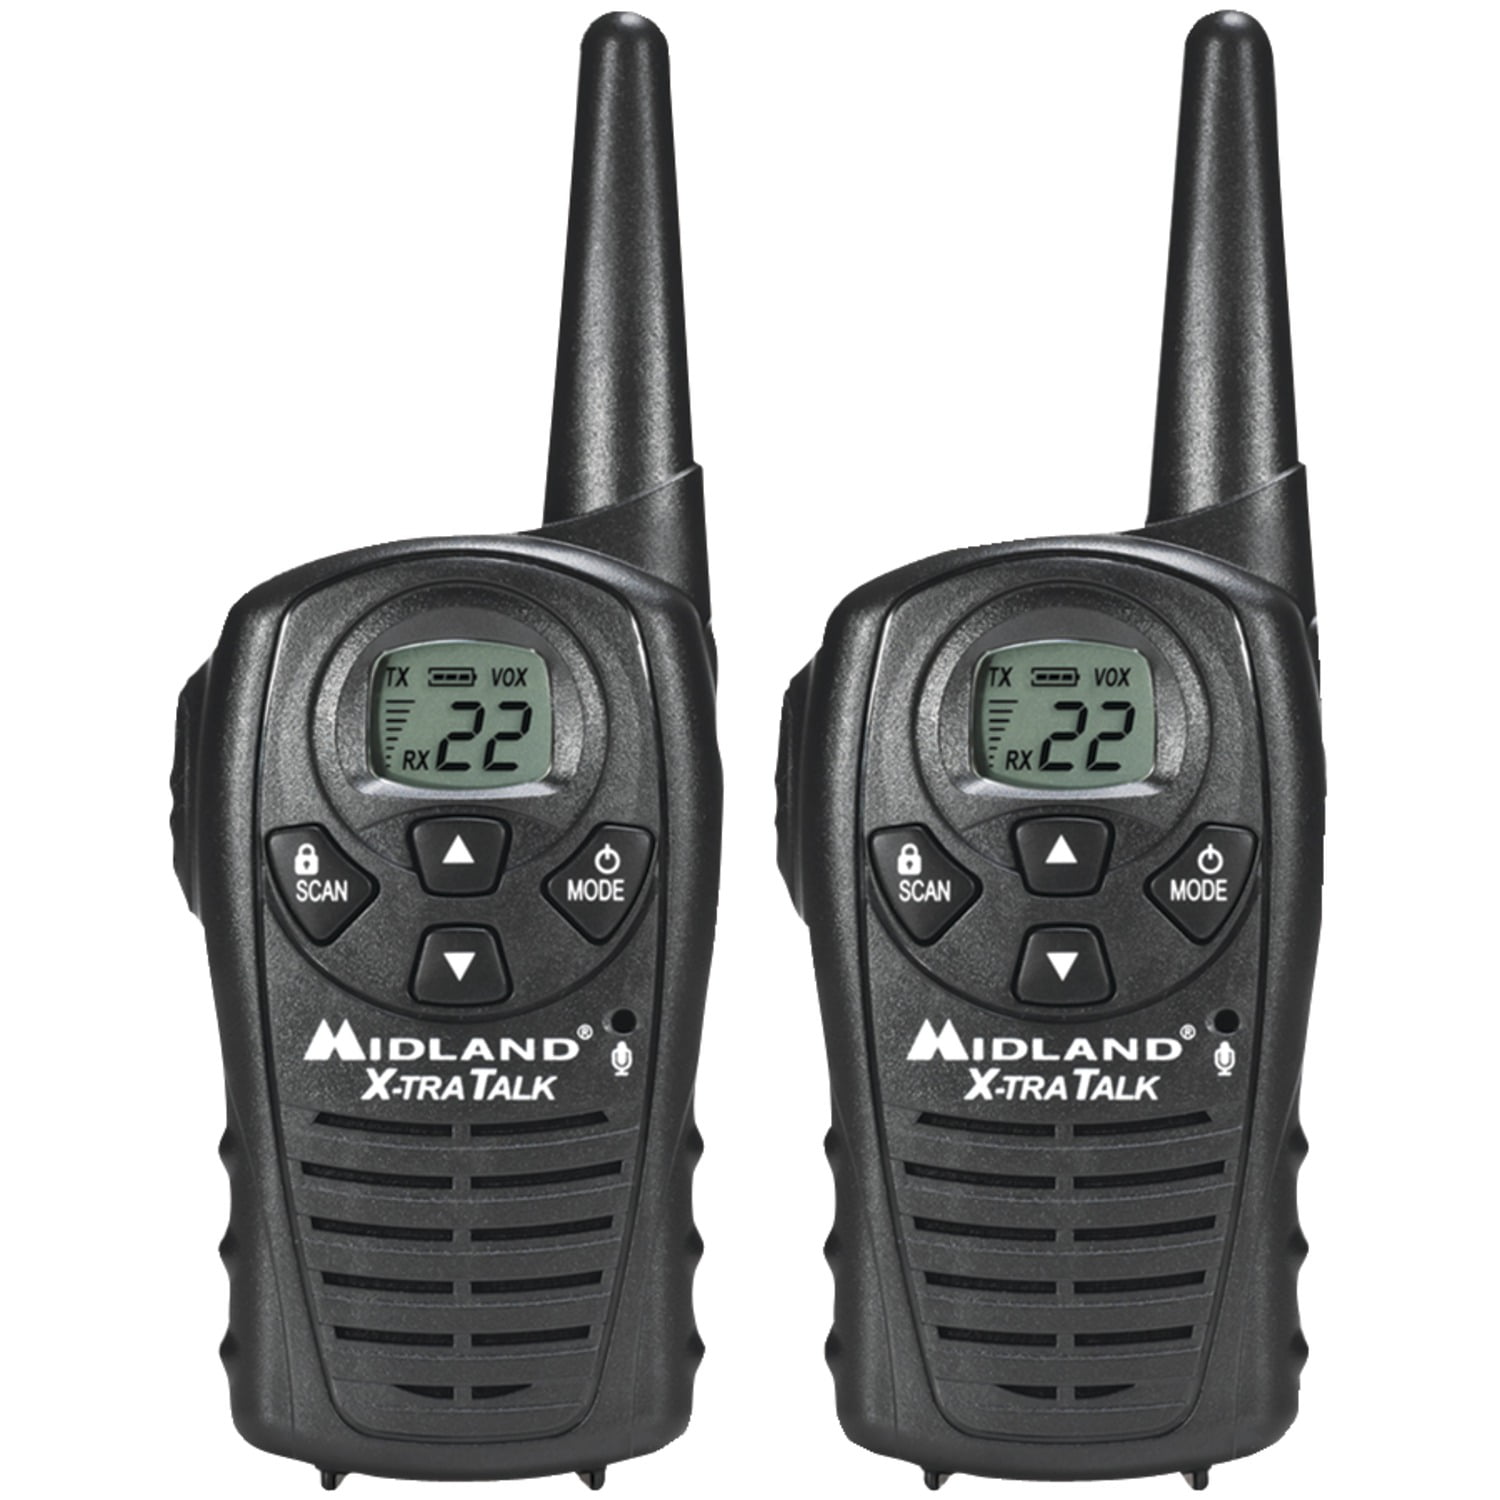 Midland LXT118 Two-Way Radio FRS GMRS 22 Channel Walkie Talkie 6 PACK